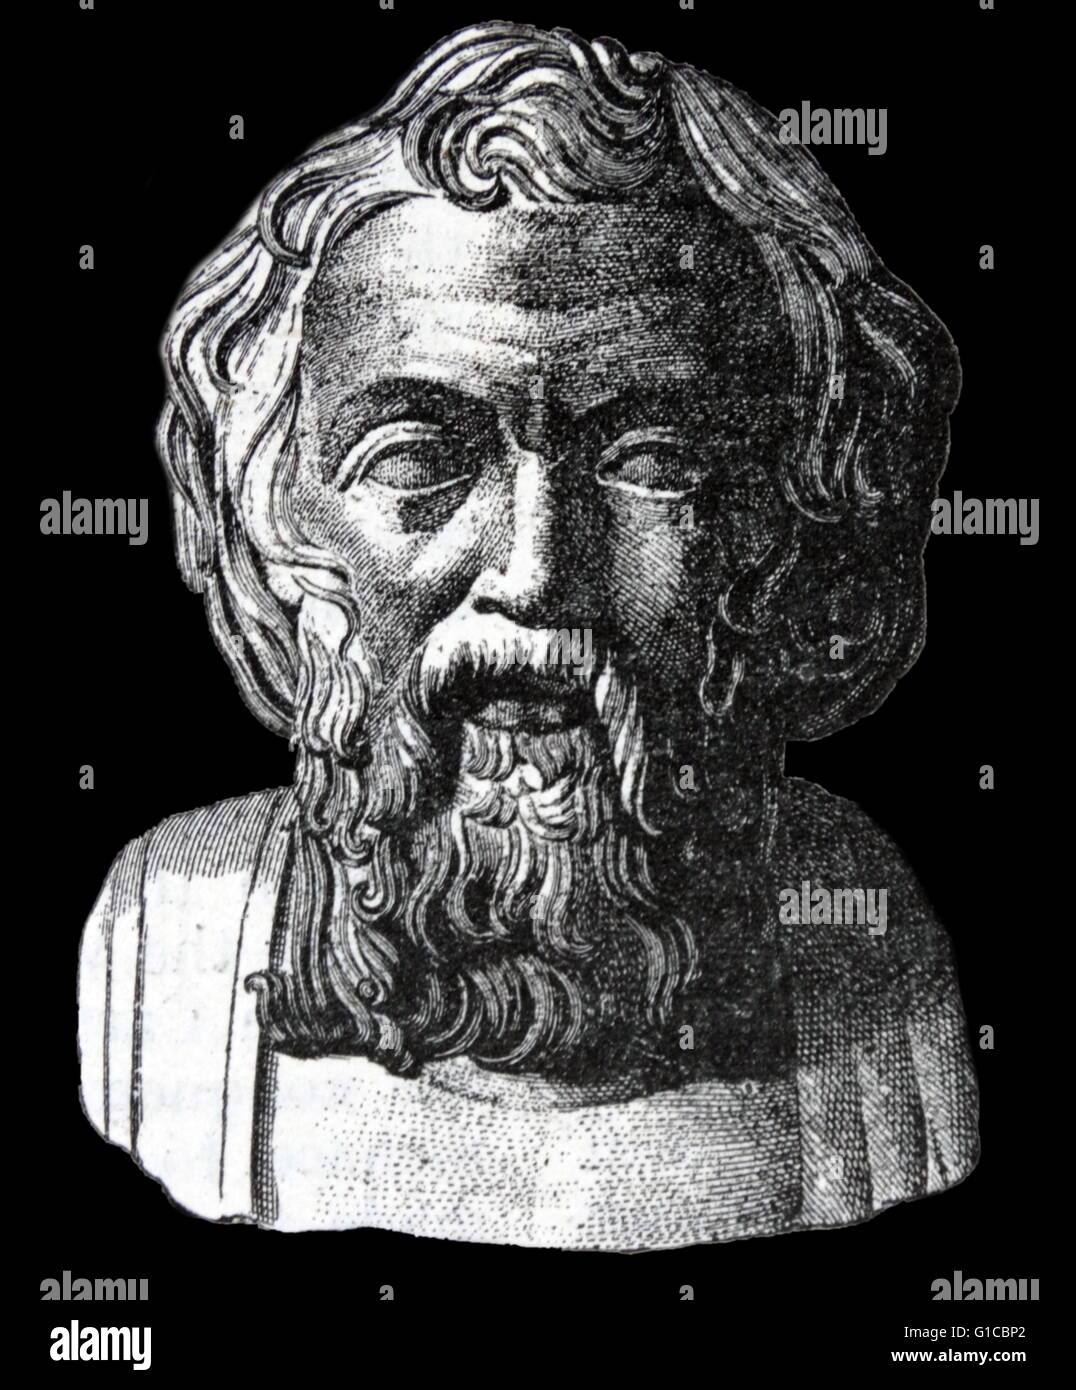 Portrait of Lycurgus of Sparta (800-730 BC) legendary lawgiver of Sparta who established the military-oriented reformation of Spartan society in accordance with the Oracle of Apollo at Delphi. Stock Photo